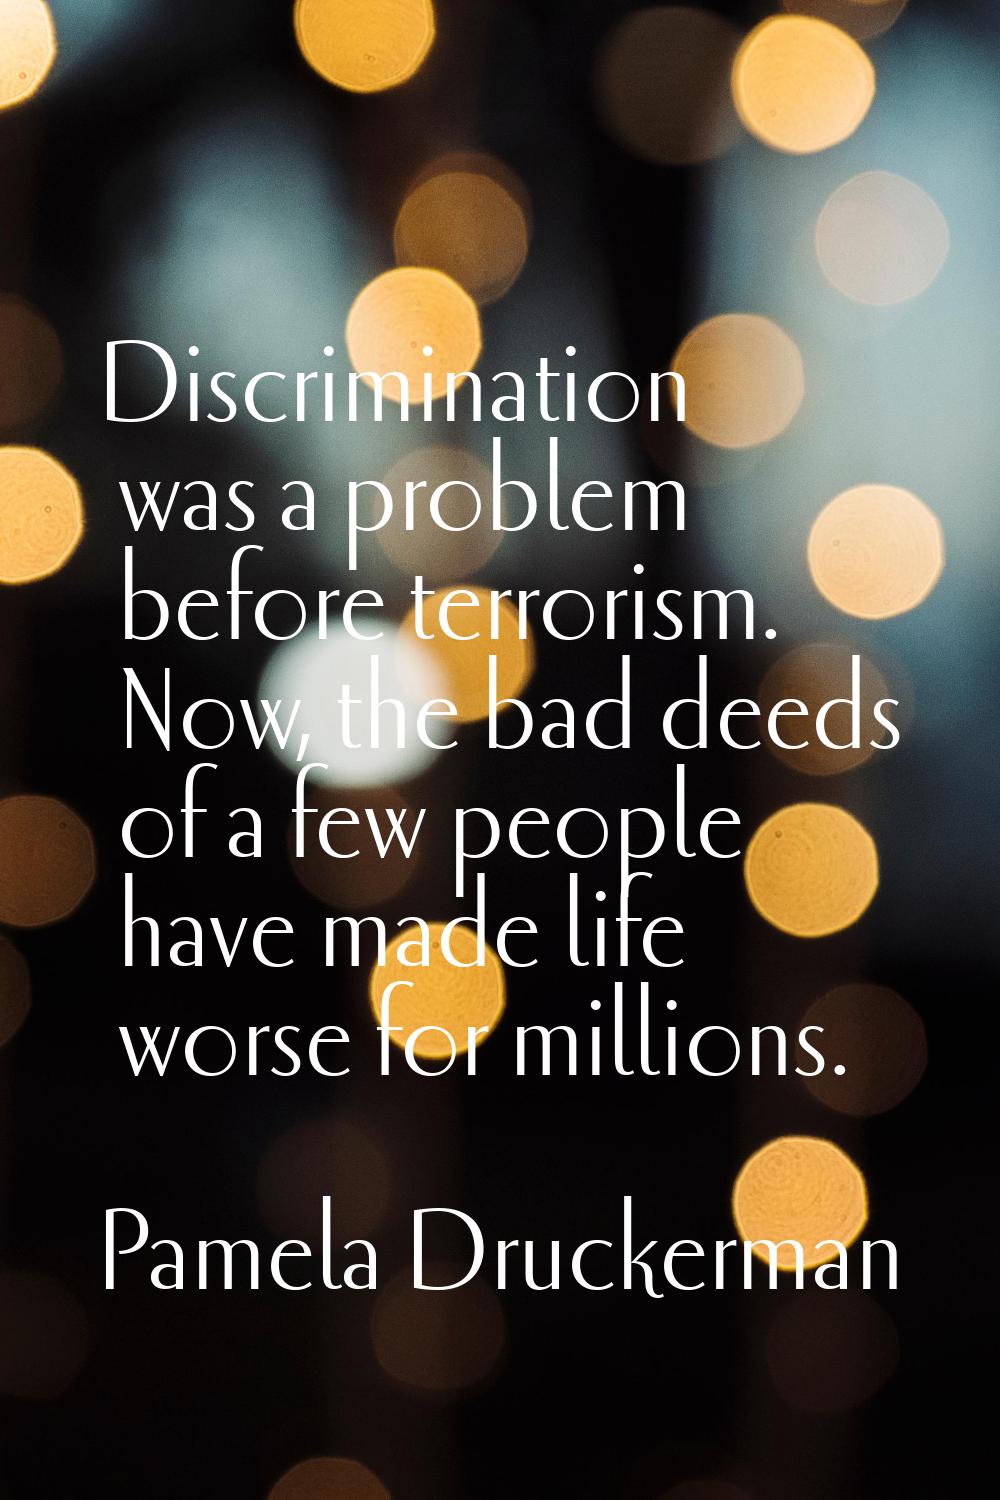 Discrimination was a problem before terrorism. Now, the bad deeds of a few people have made life wo